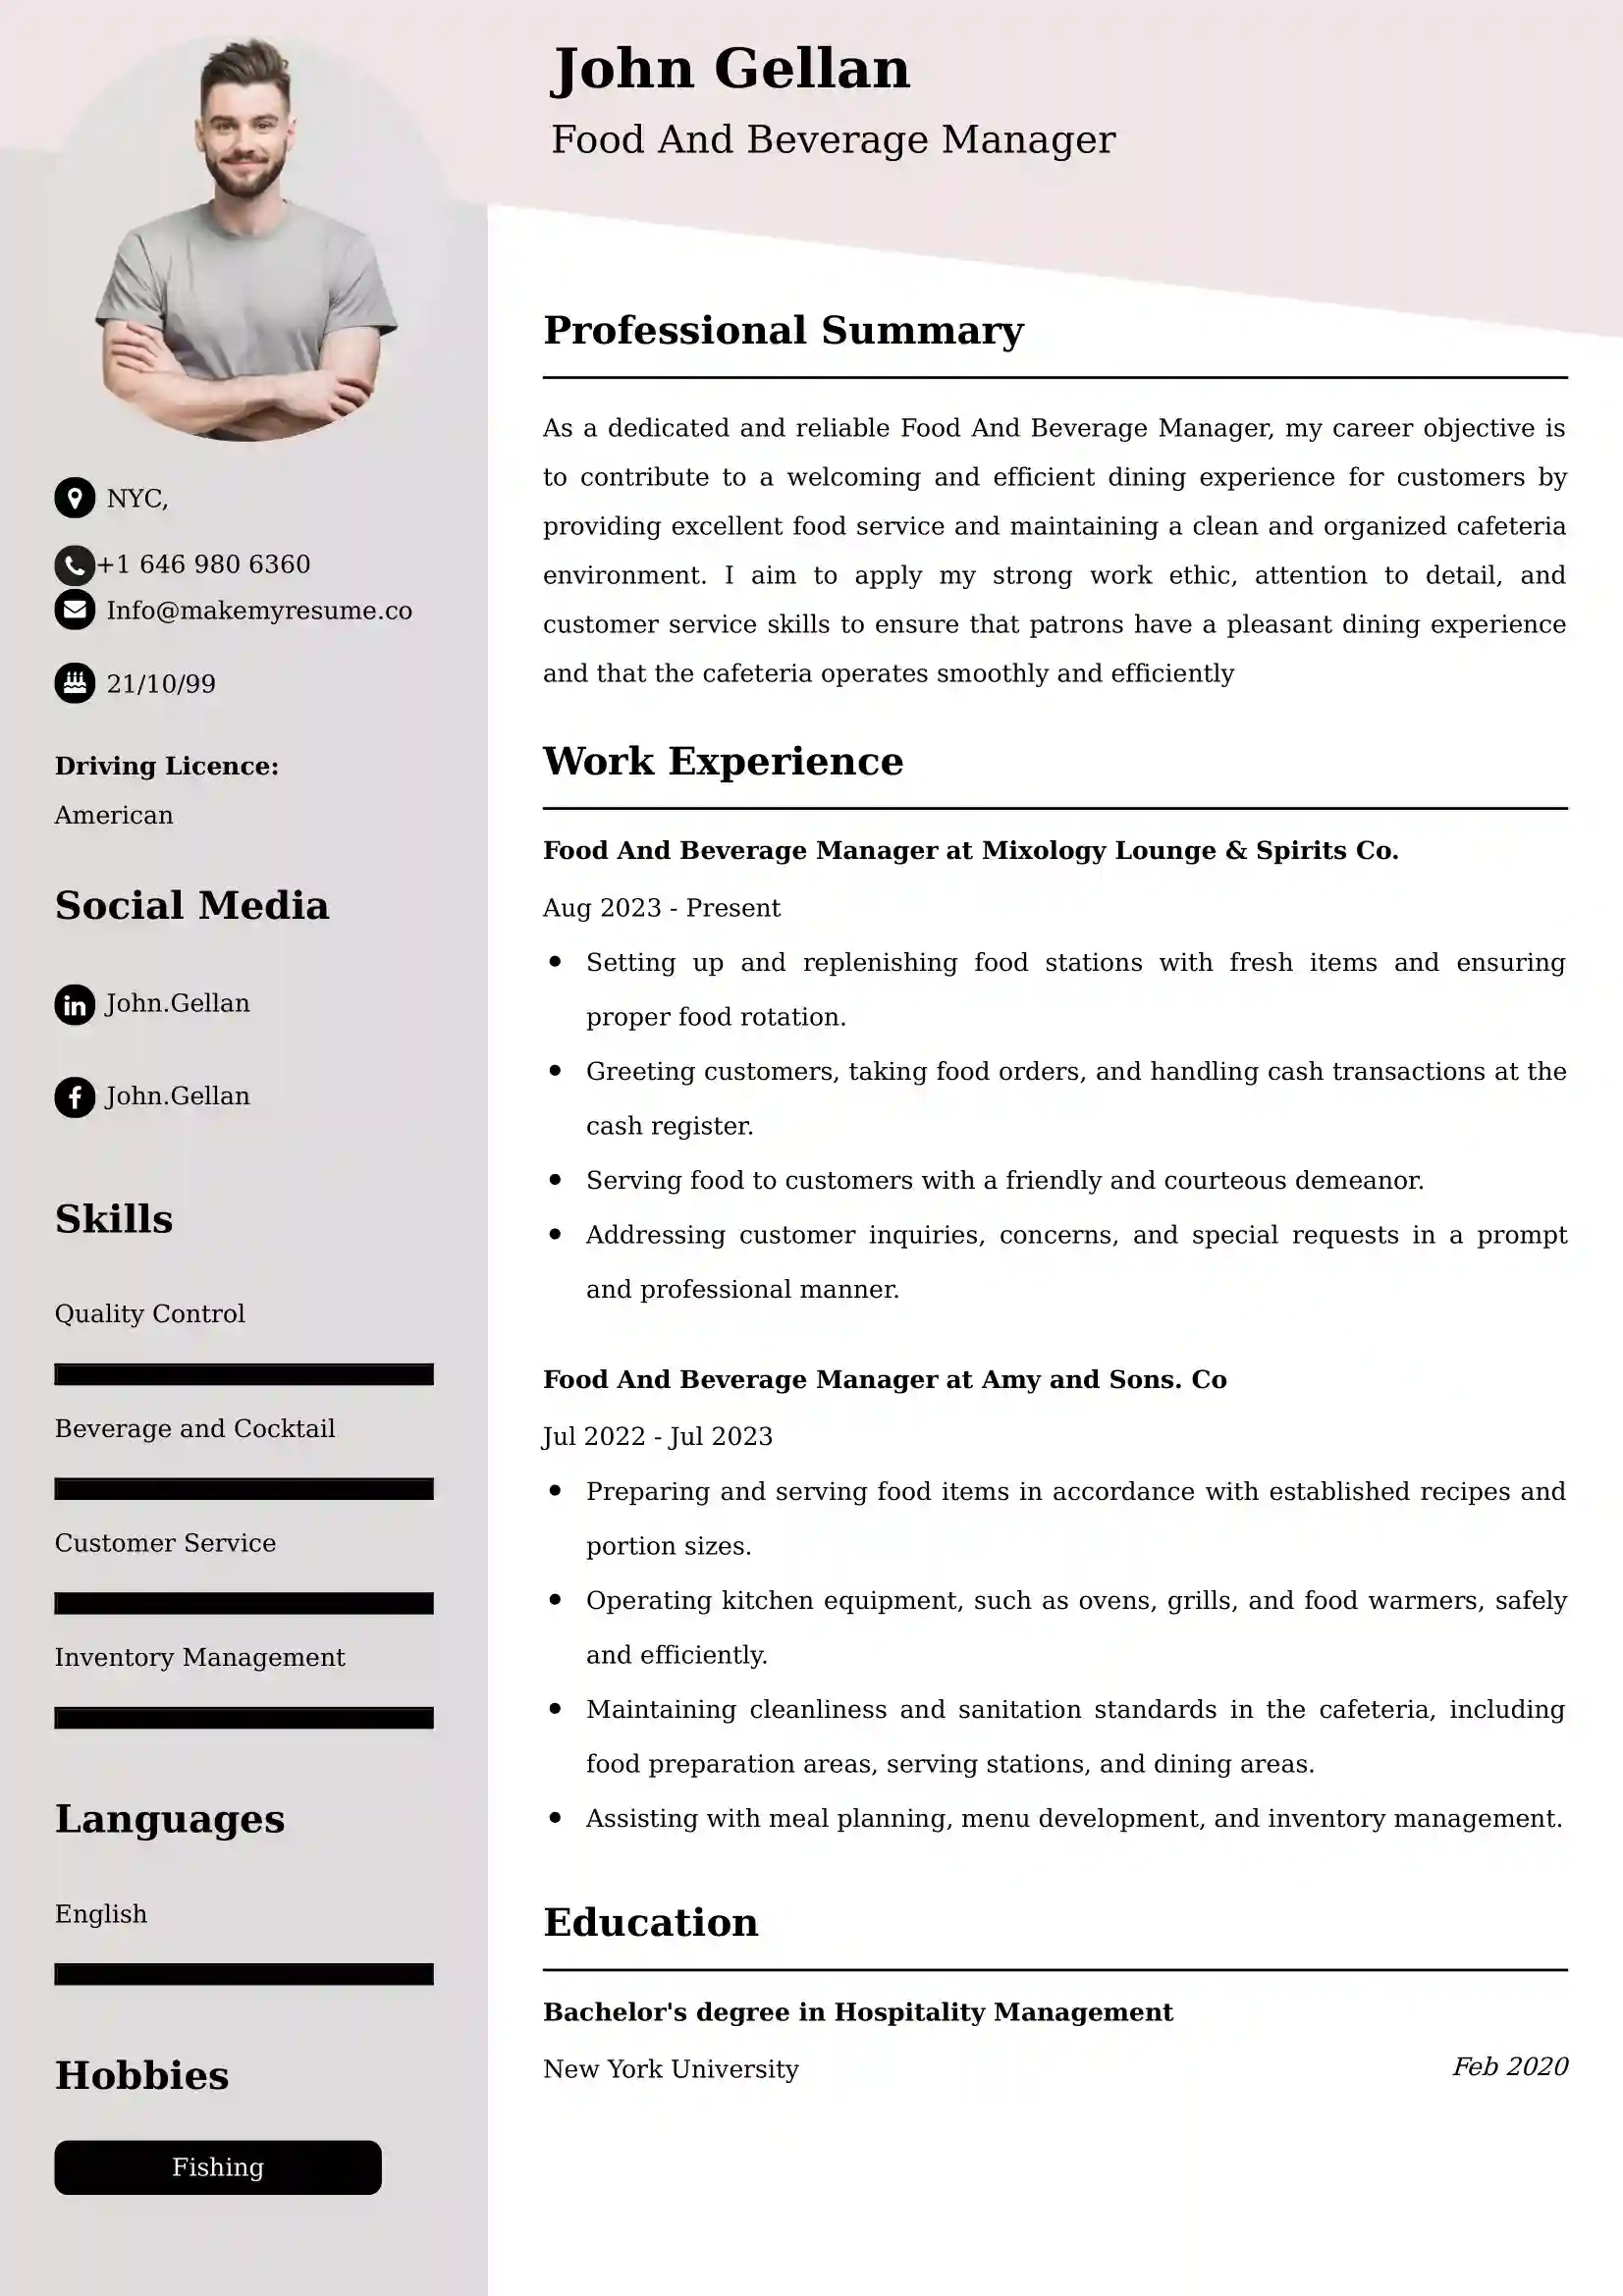 Food And Beverage Manager Resume Examples - UAE Format and Tips.